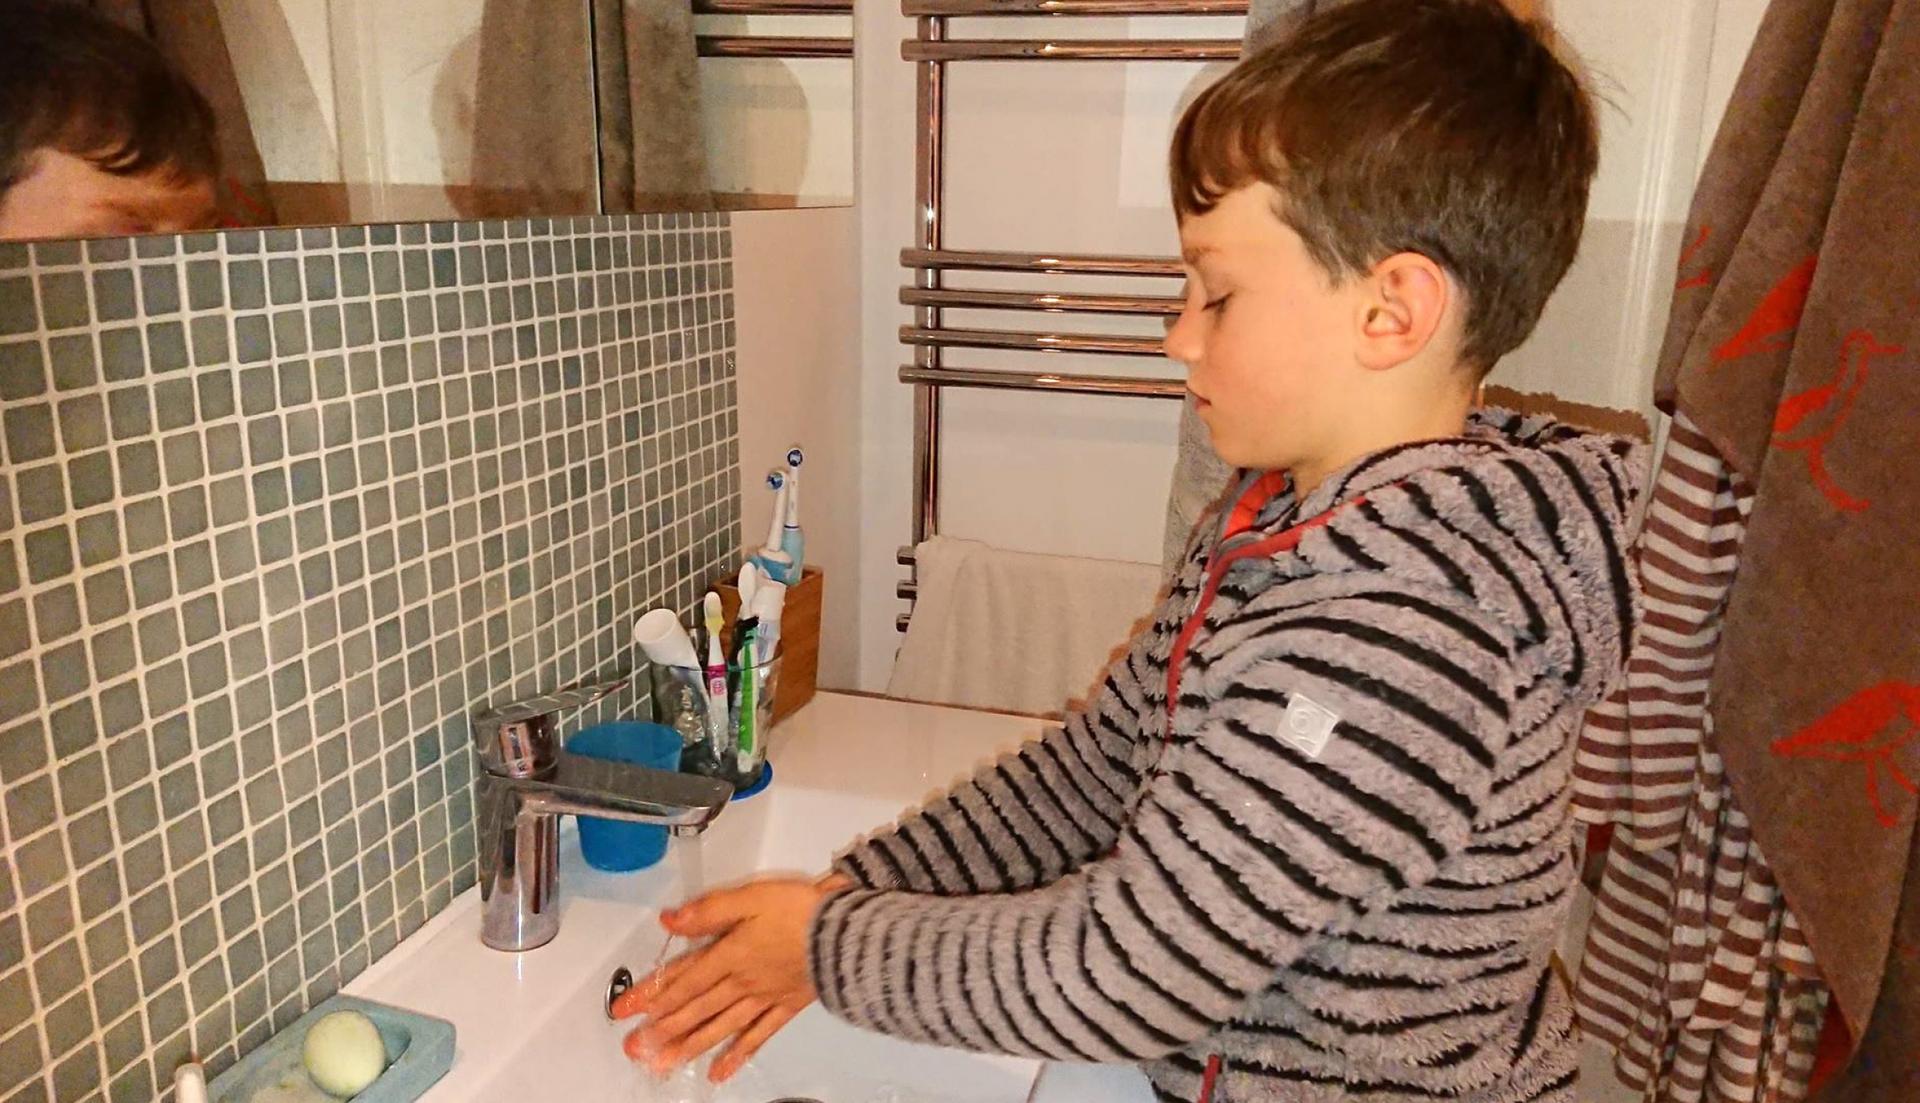 Jacob Gortmans demonstrates the proper 20-second hand-washing duration at his home in London.